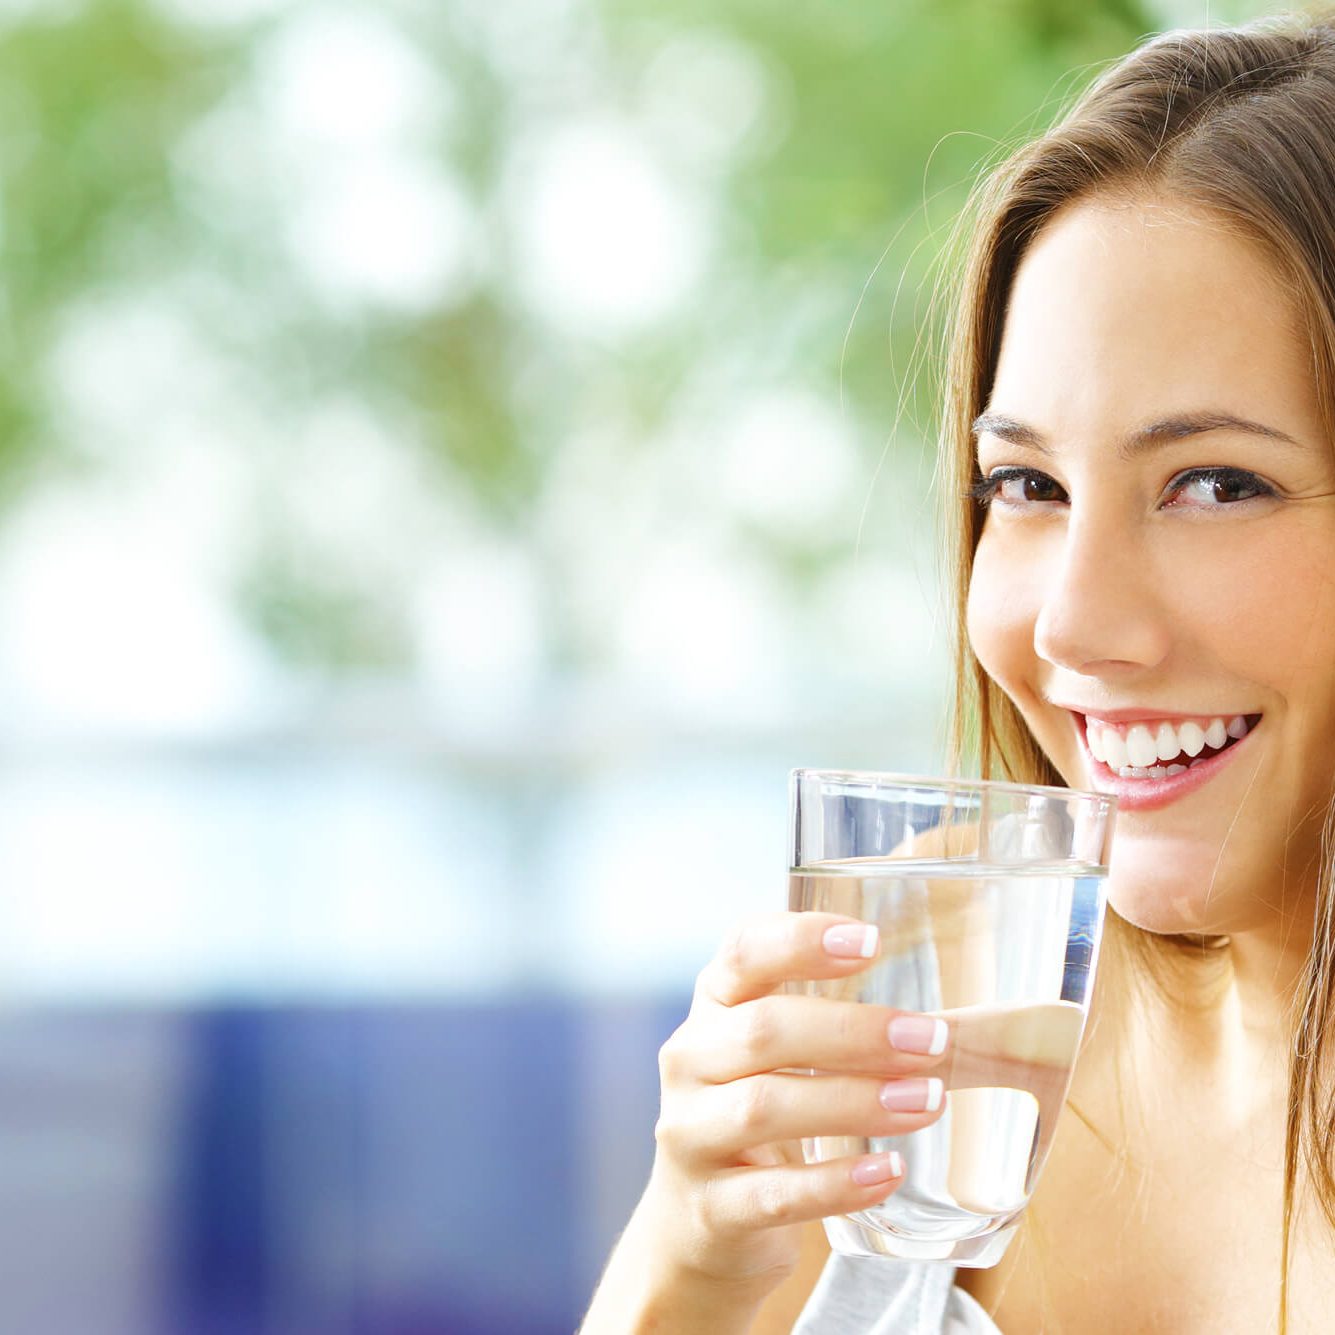 A Girl Showing Her Teeth While Smiling and Holding Glass of Water